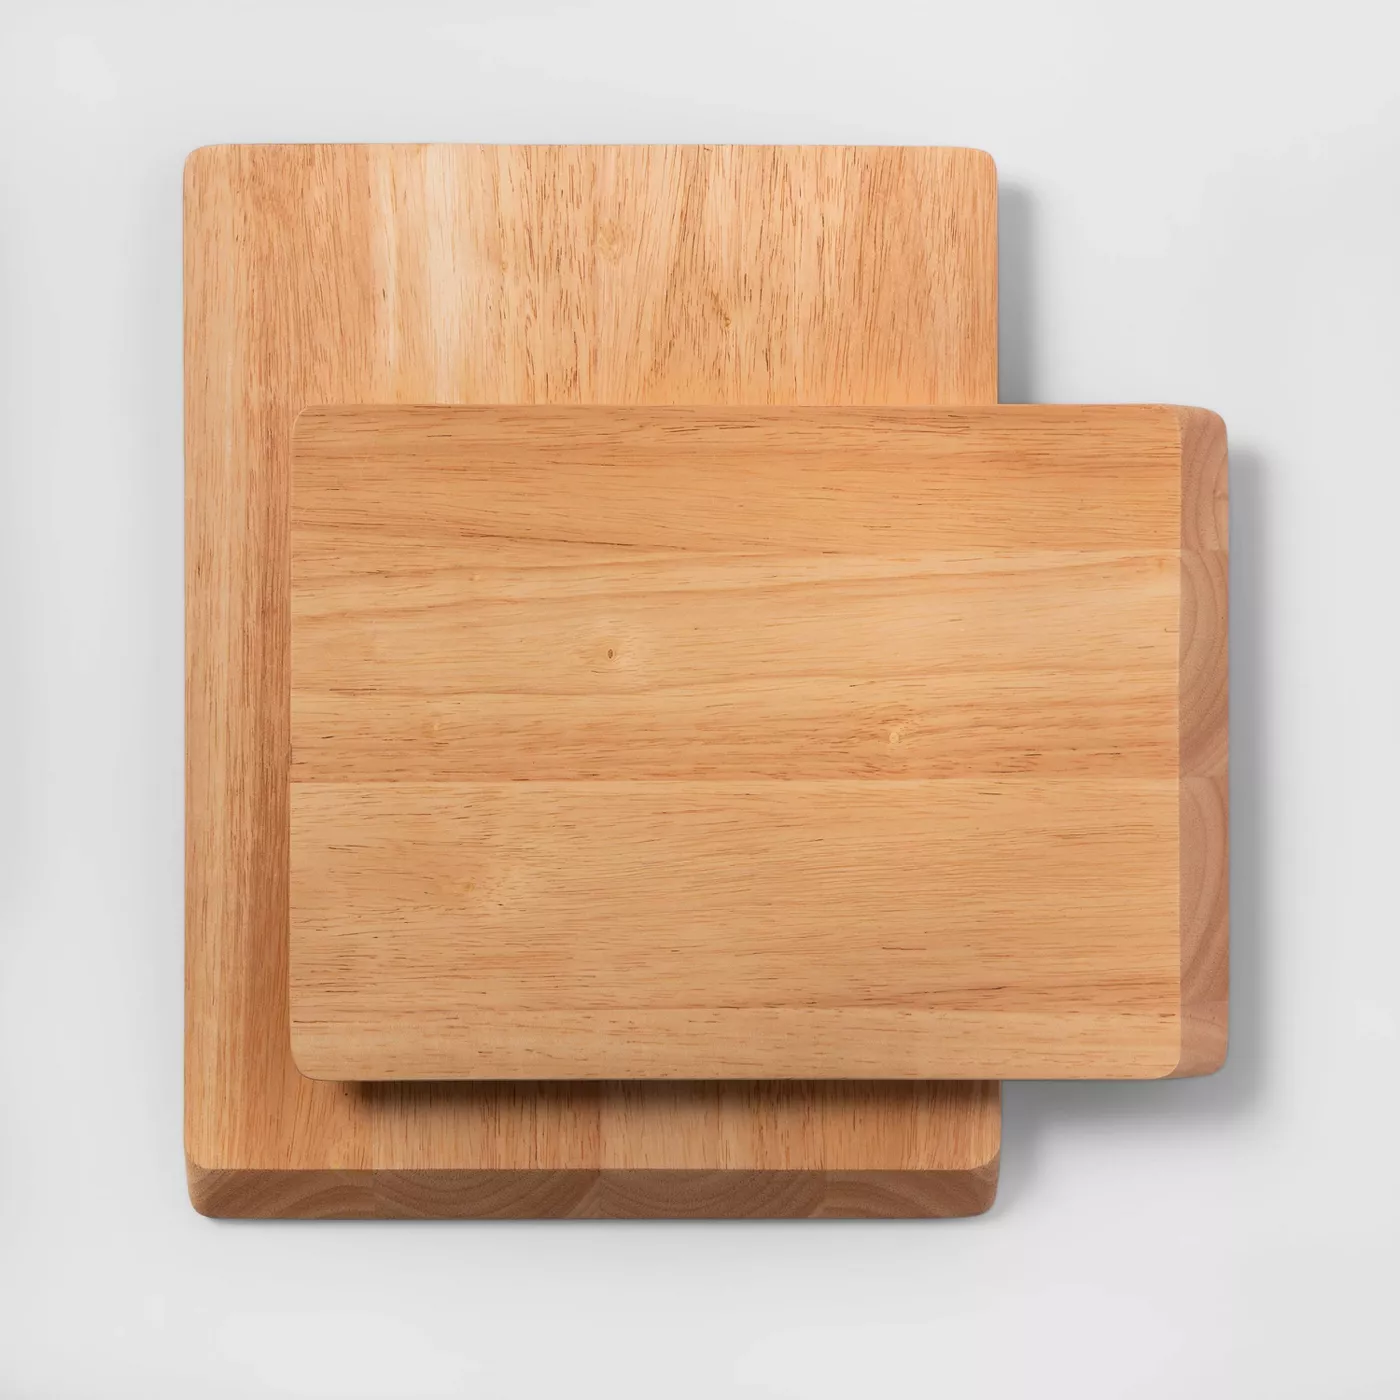 2pc Nonslip Wood Cutting Board Set - Made By Design™ - image 1 of 3